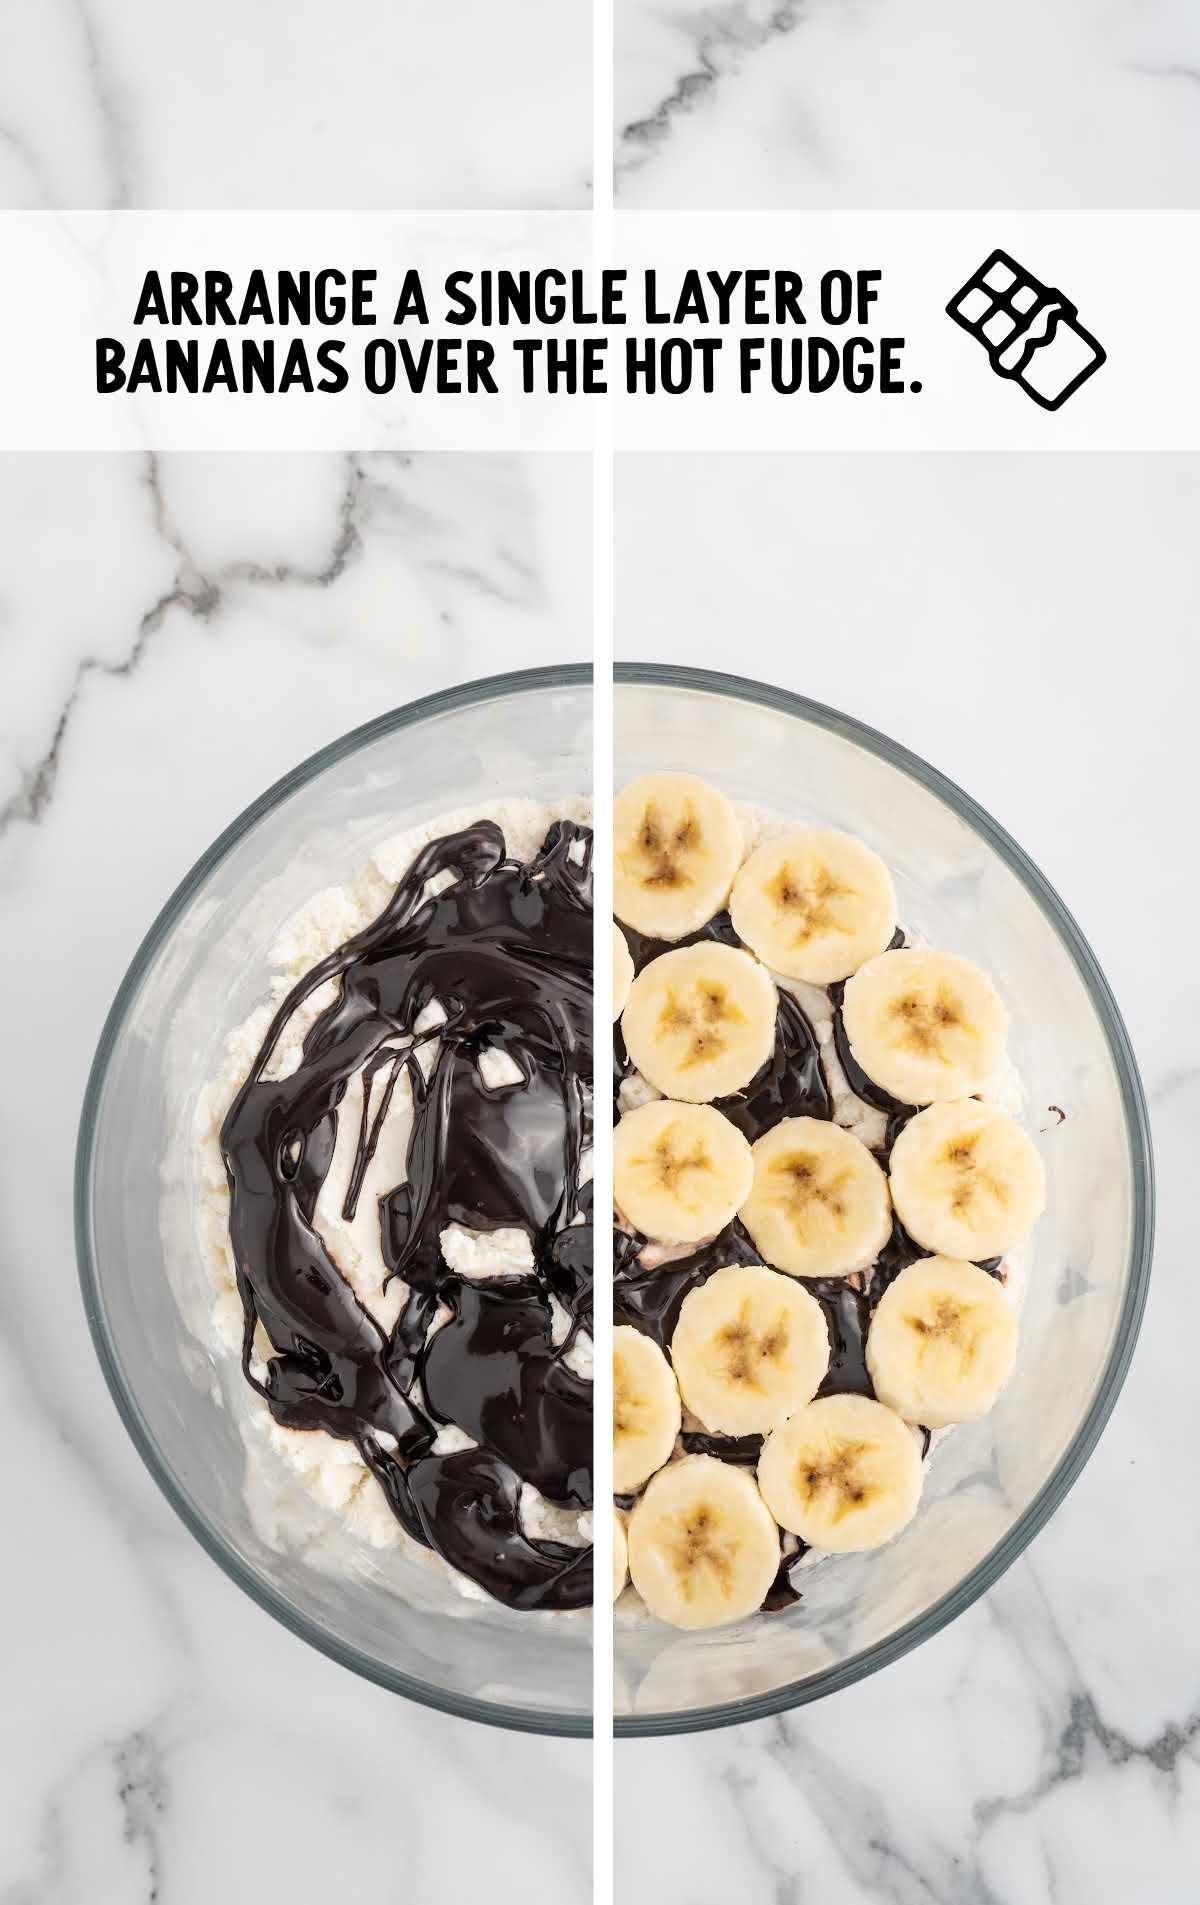 slices of banana spread over the hot fudge